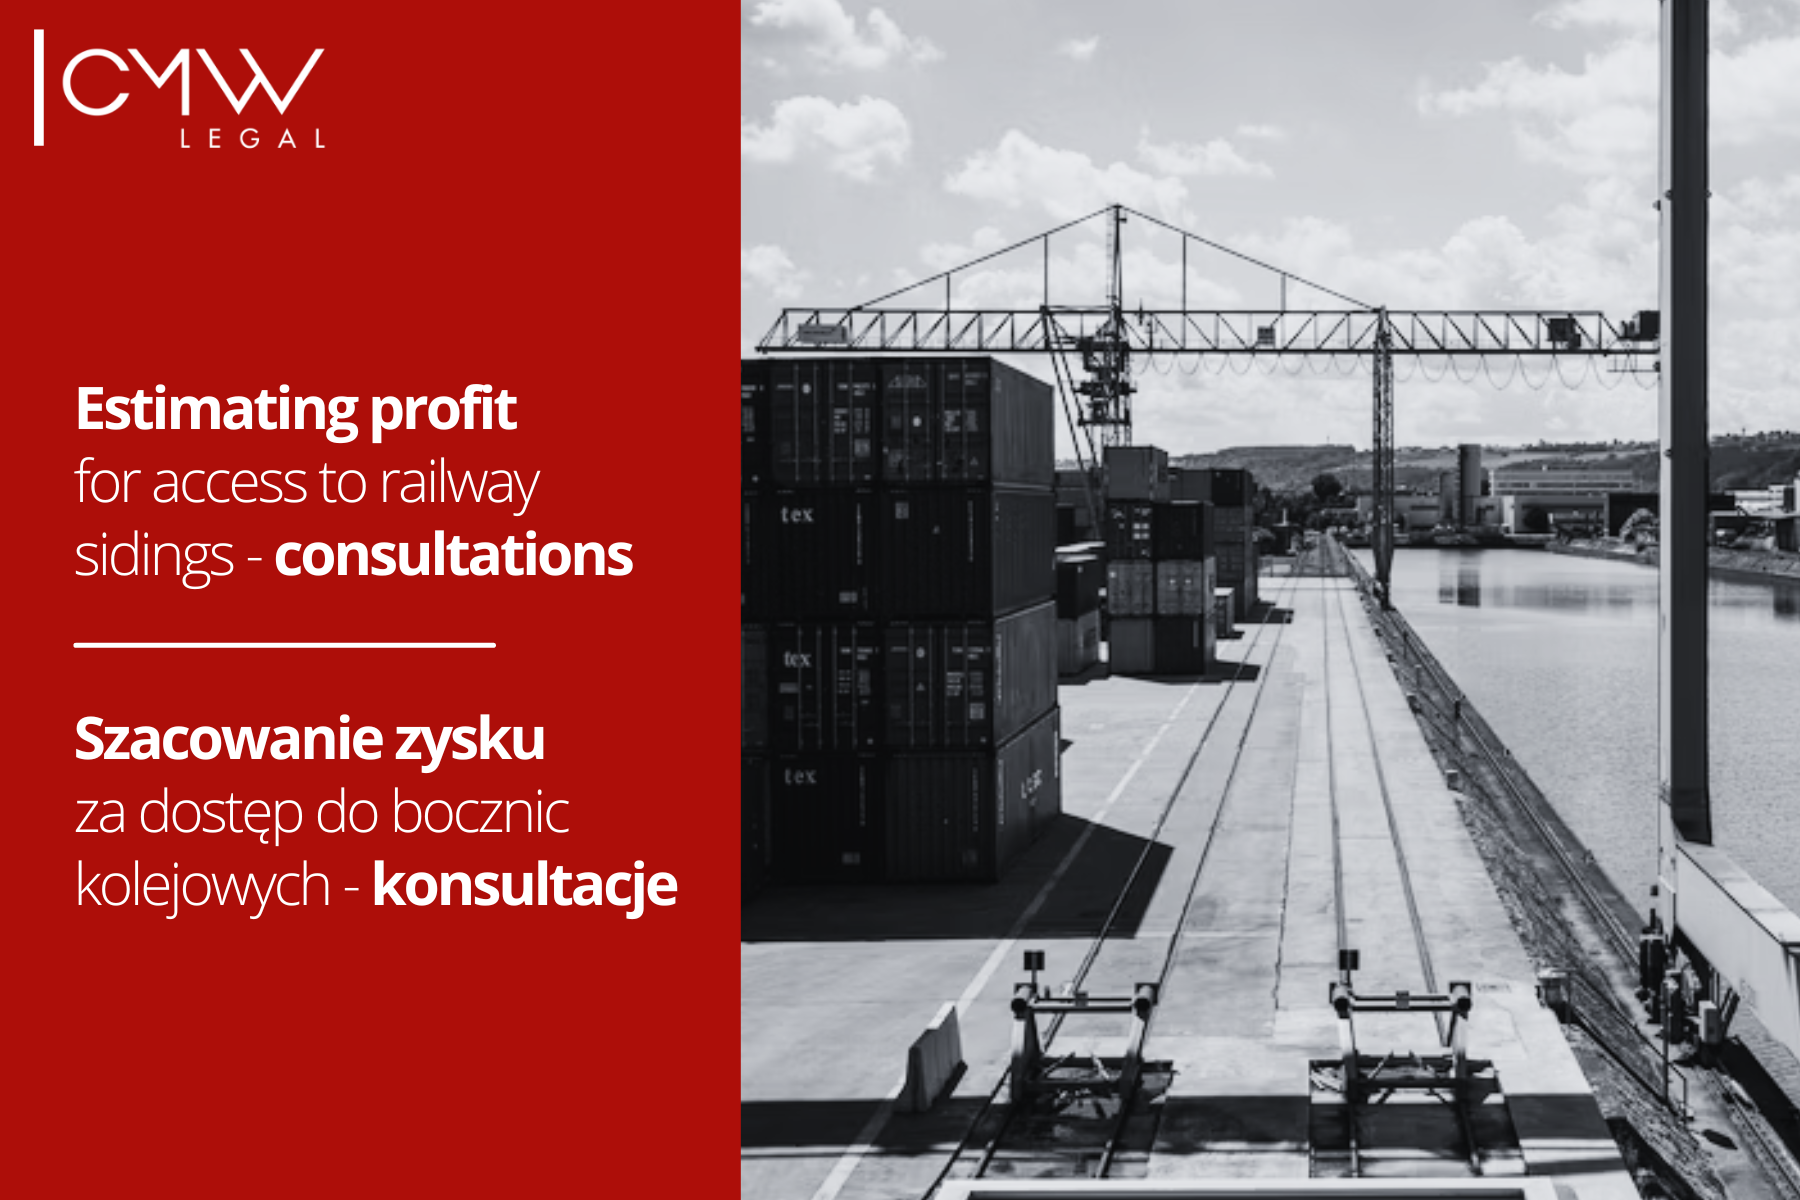  The Polish Office of Rail Transport has started consultations on guidelines for estimating a reasonable profit for providing sidings